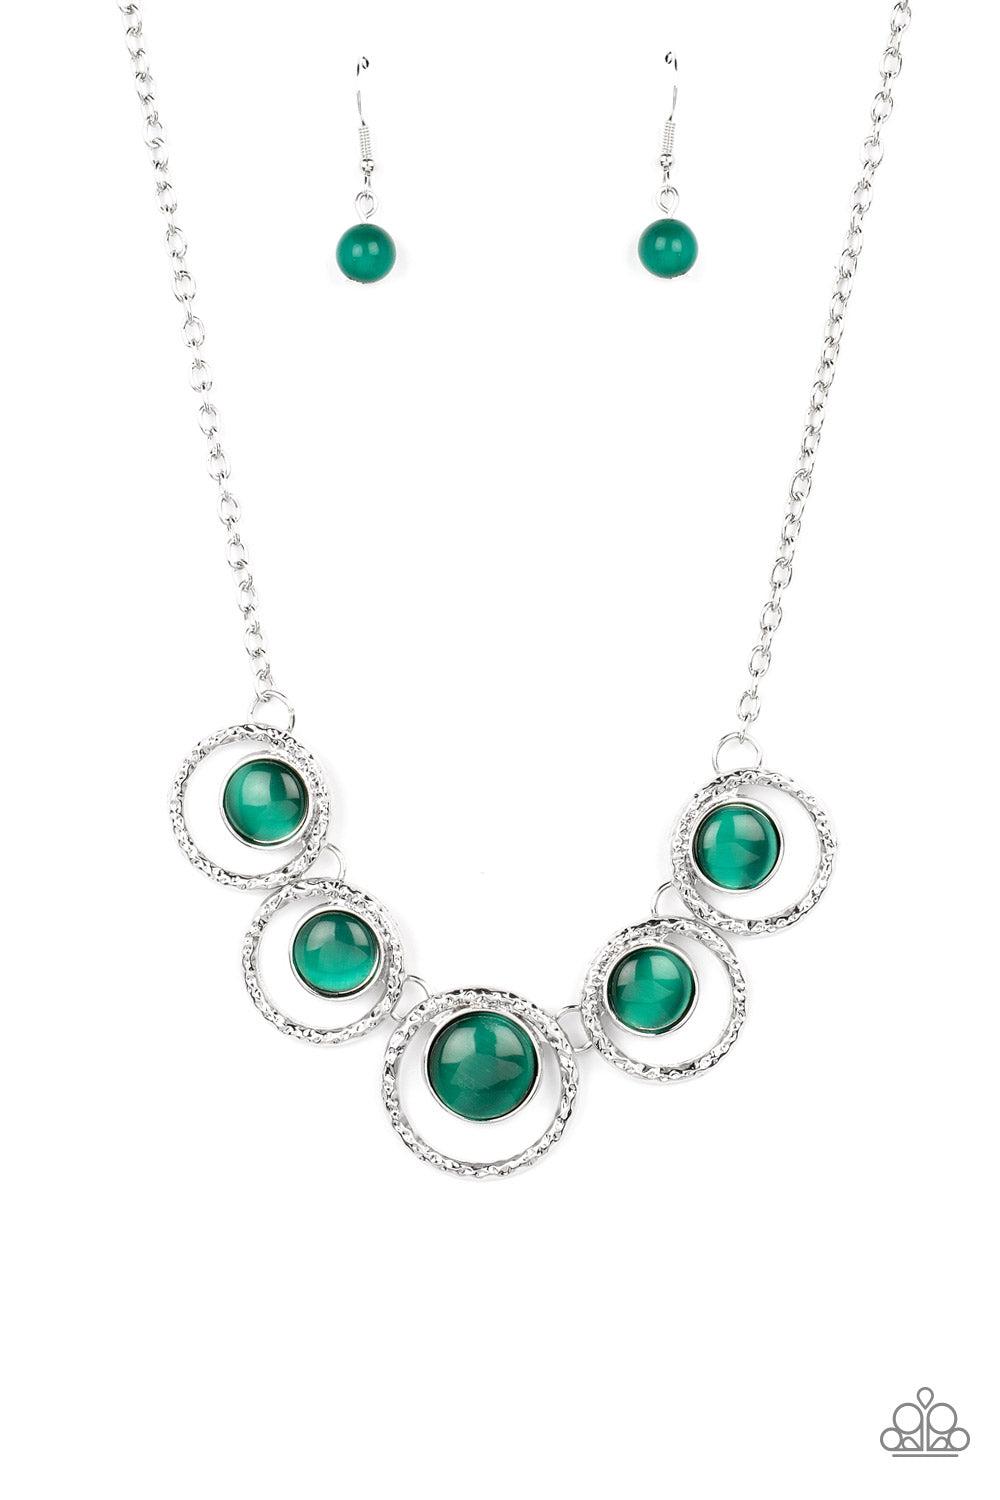 Elliptical Enchantment Green Cat's Eye Stone Necklace - Paparazzi Accessories- lightbox - CarasShop.com - $5 Jewelry by Cara Jewels